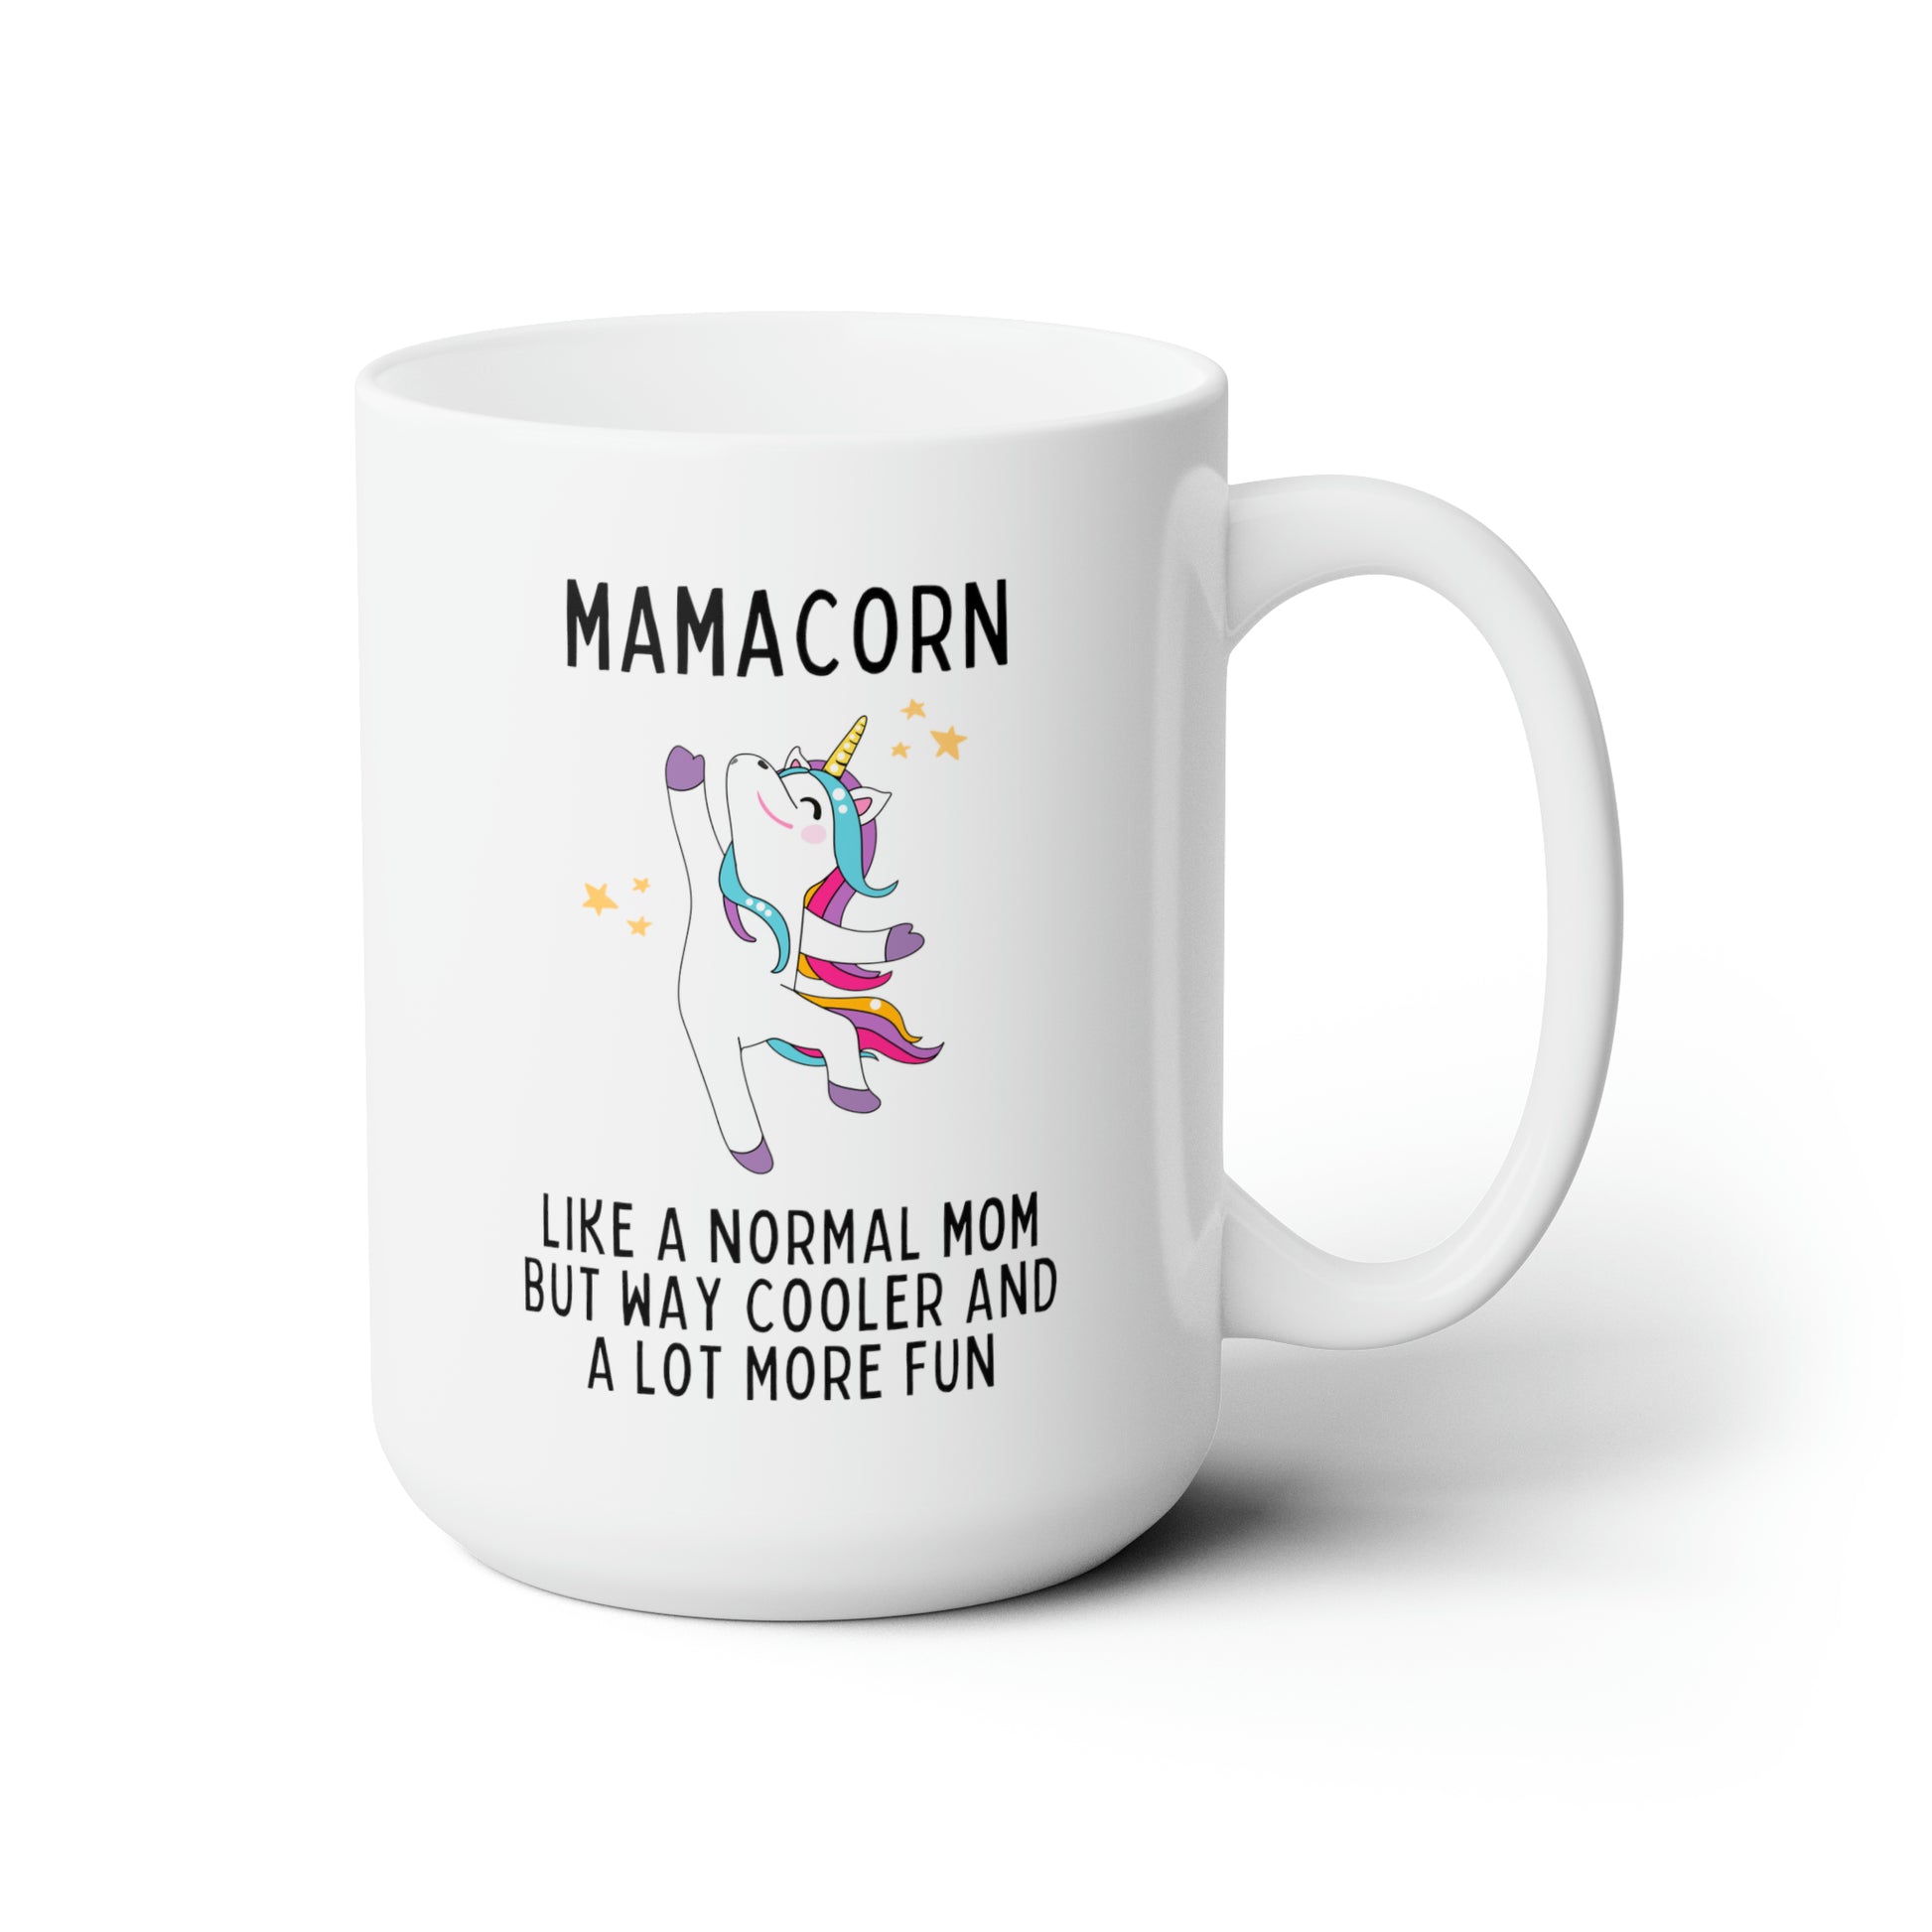 Mamacorn Like A Normal Mom But Way Cooler And A Lot More Fun 15oz white funny large coffee mug gift for mom unicorn lover awesome mothers day waveywares wavey wares wavywares wavy wares